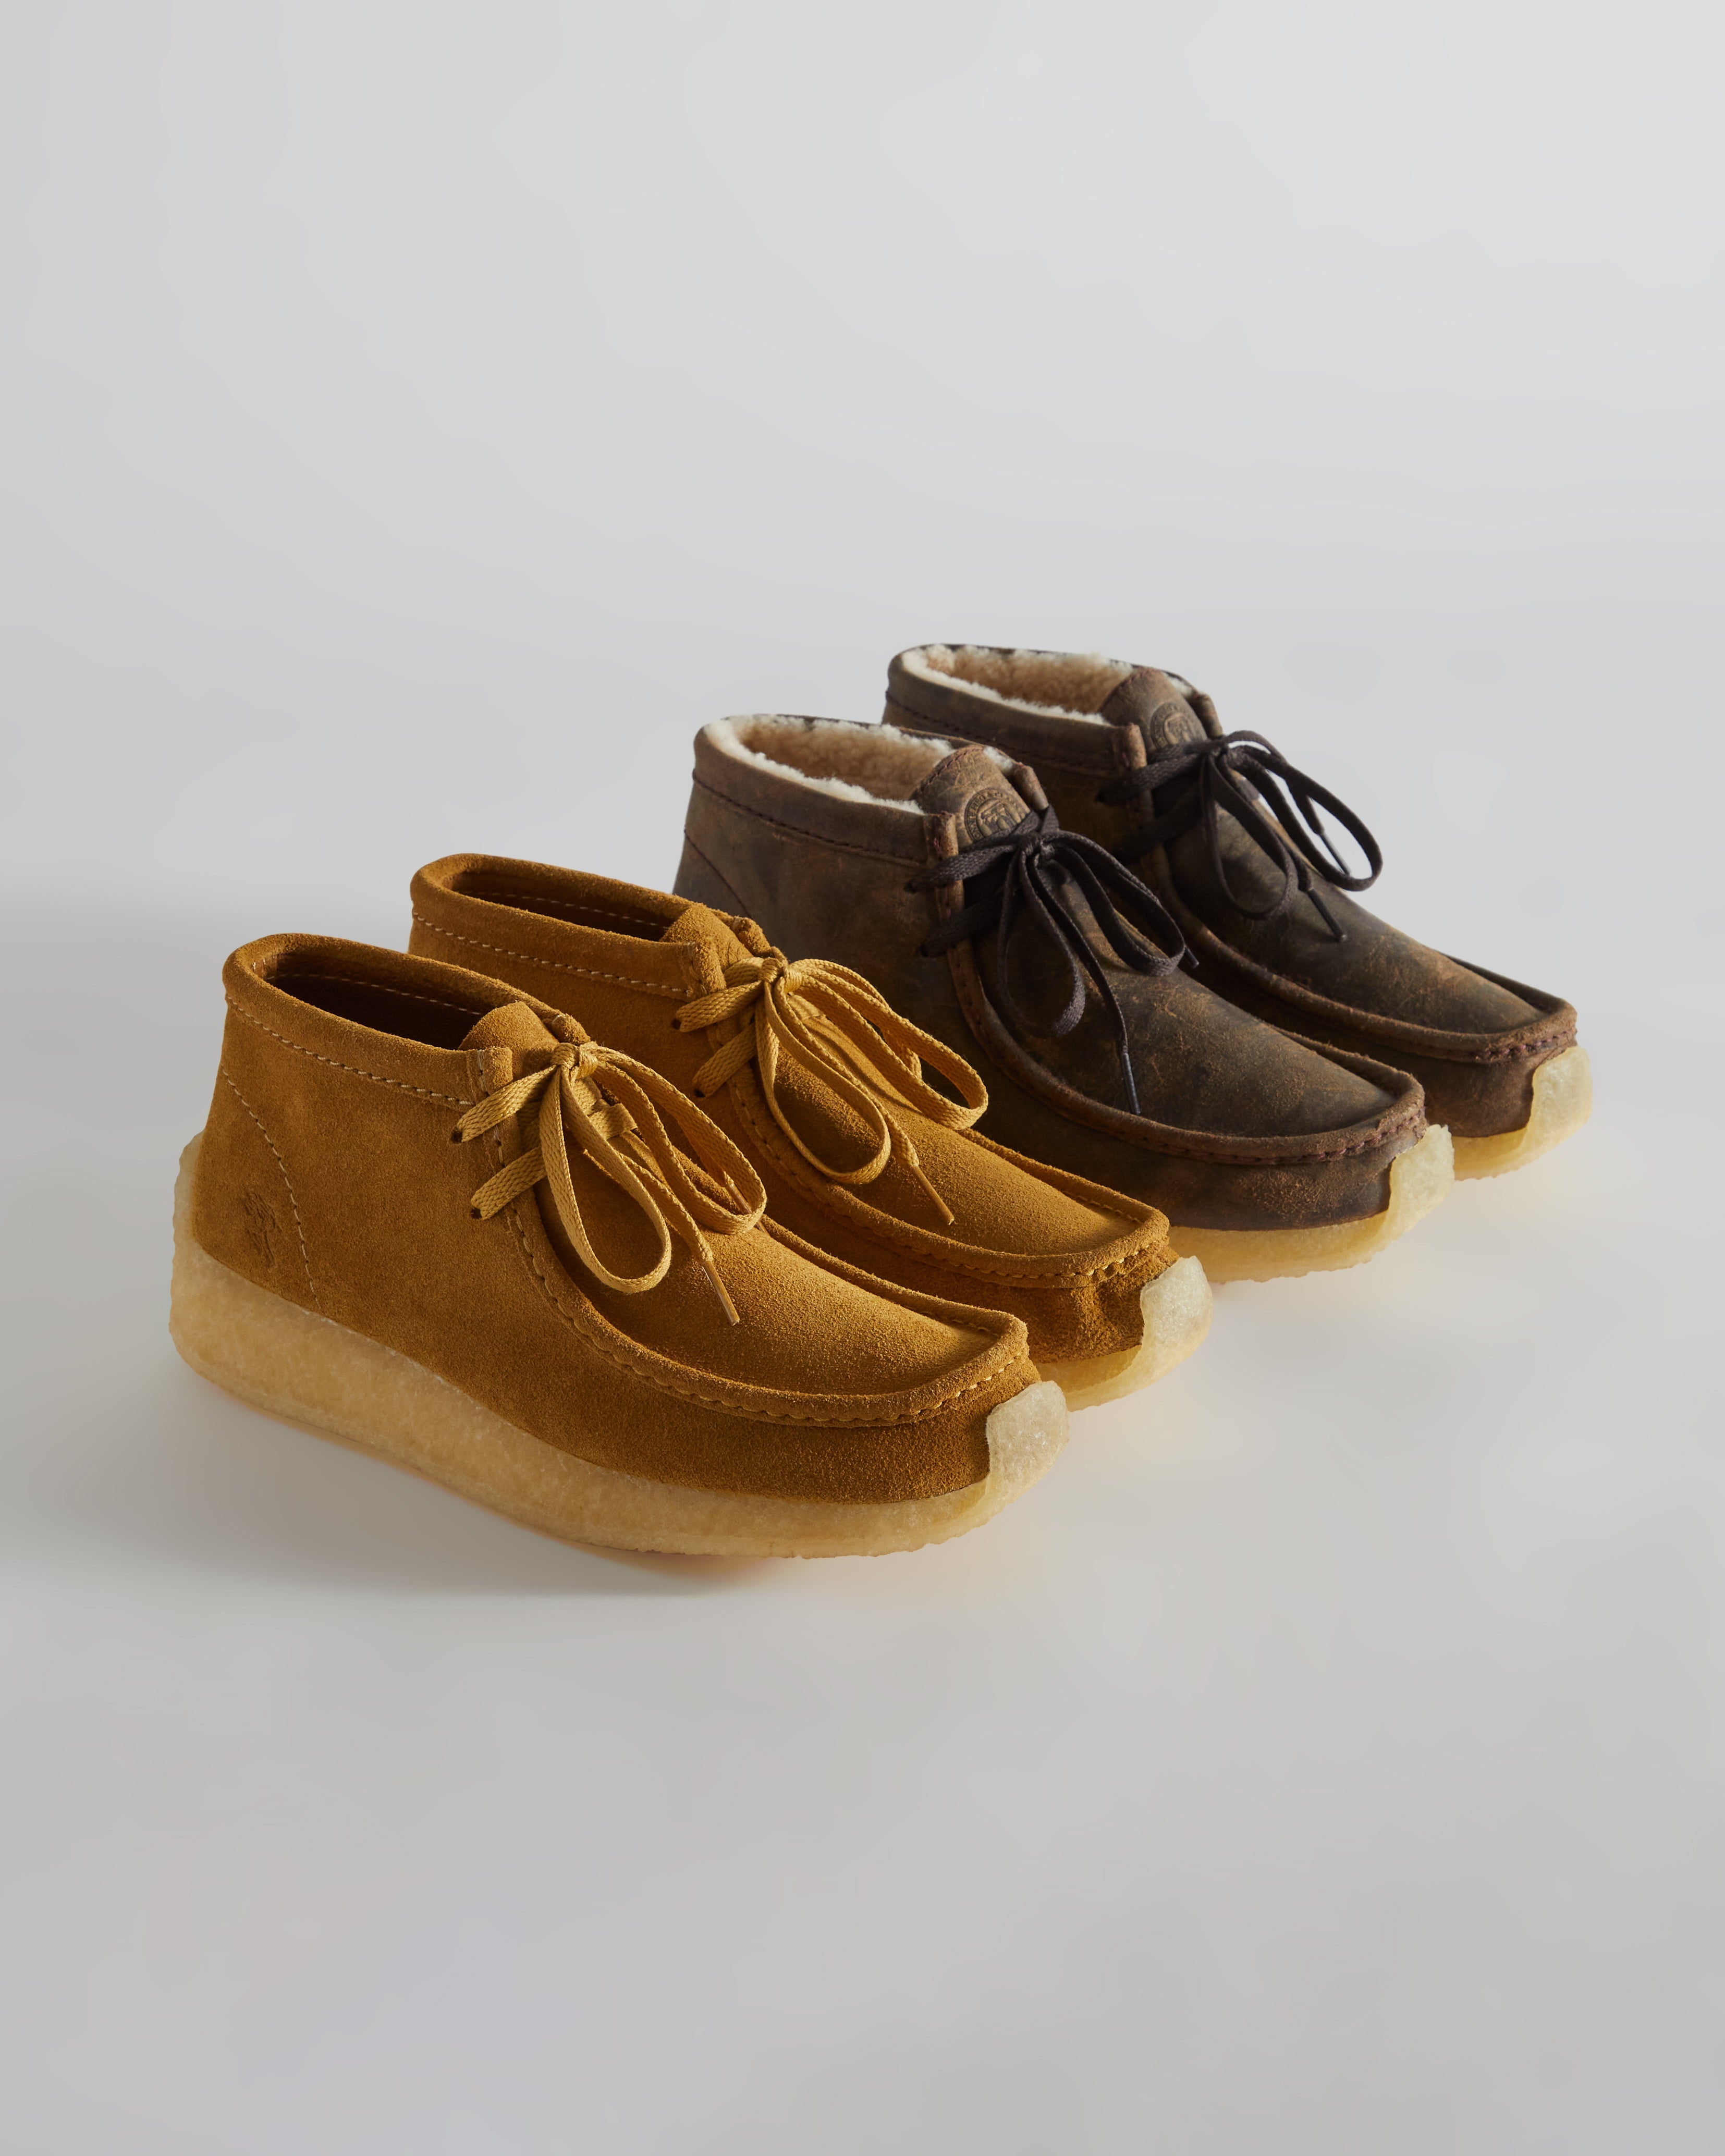 8th St by Ronnie Fieg for Clarks Originals Winter 2023